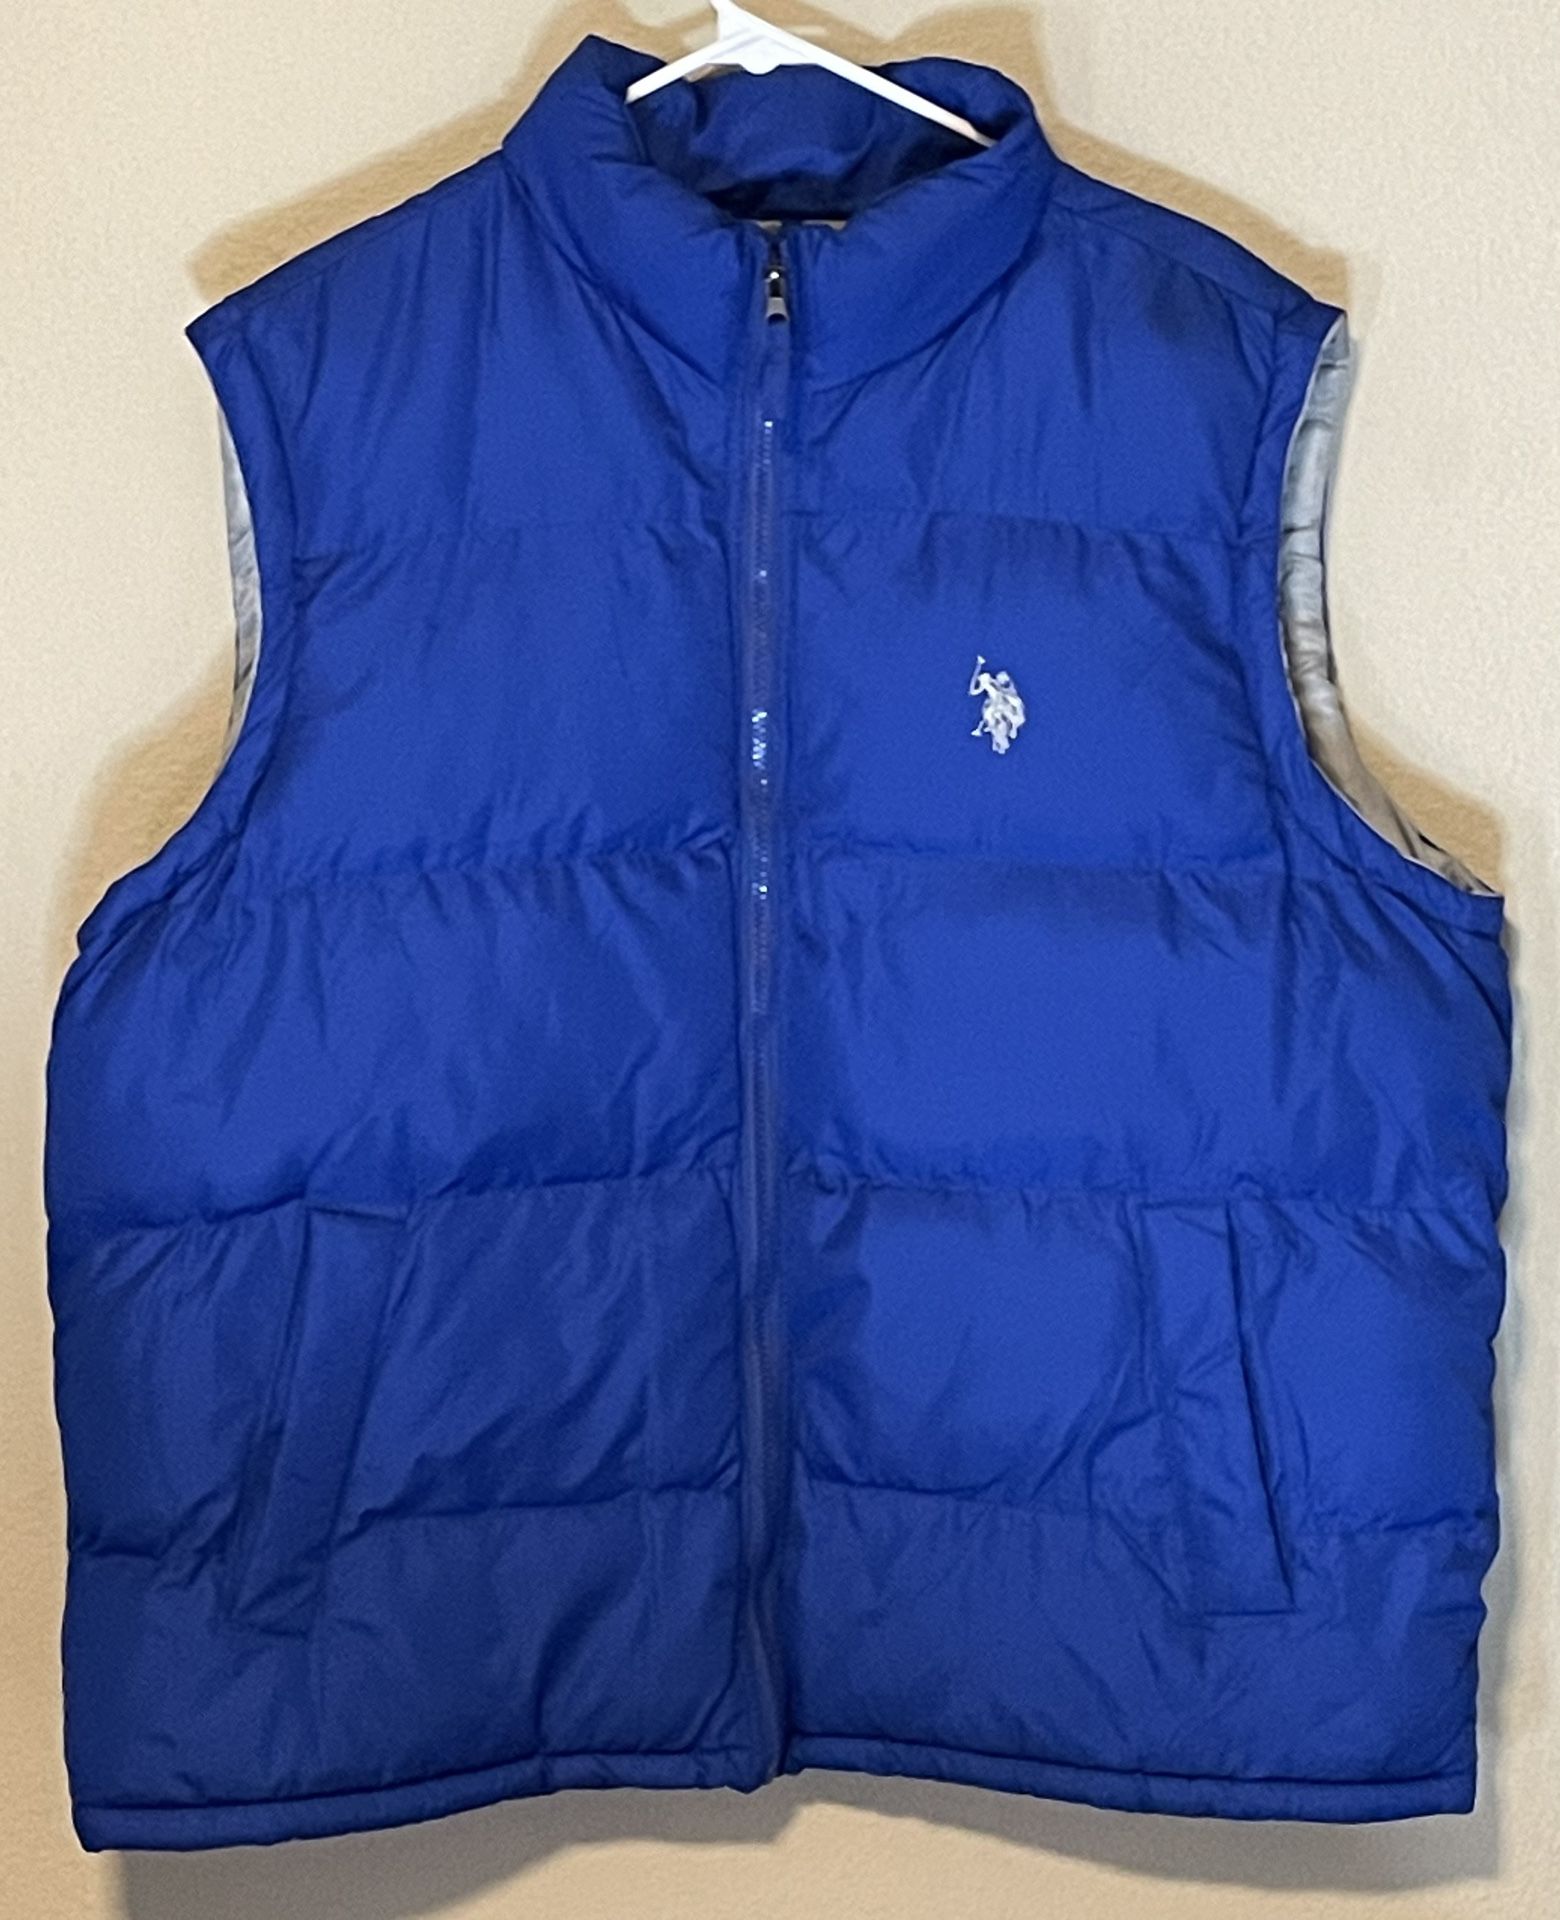 I.S. Polo Vest XL Preowned